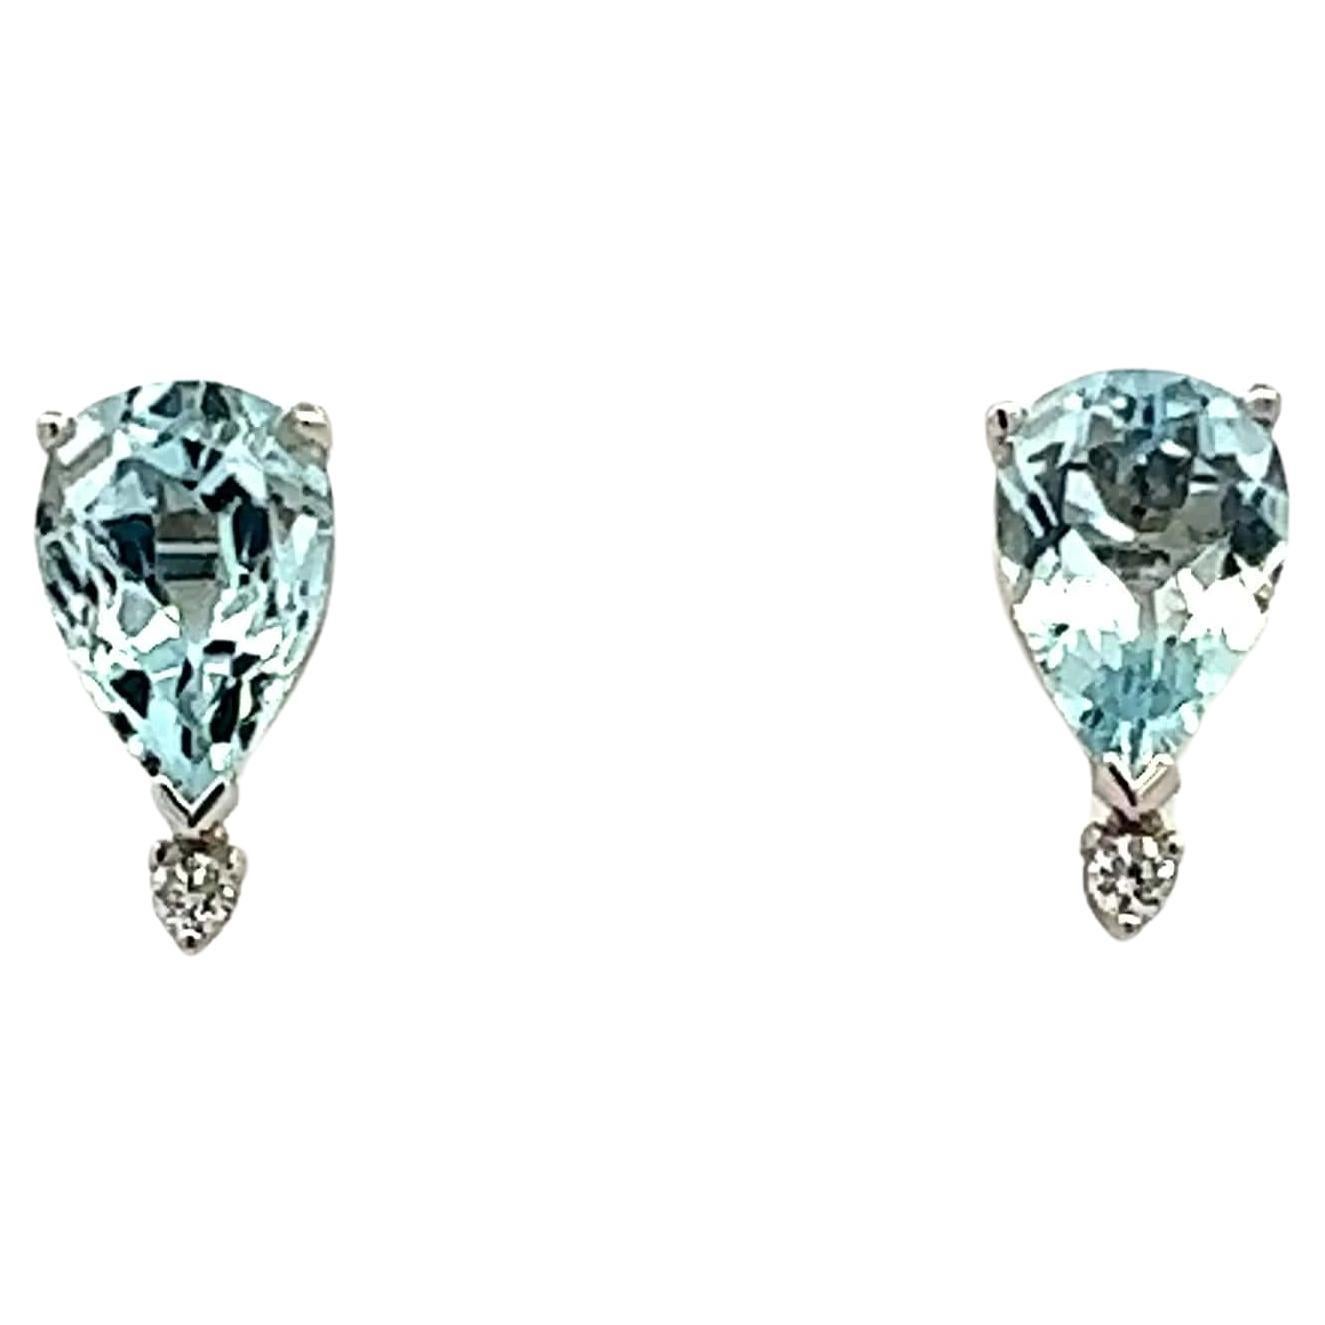 Natural Aquamarine Diamond Earrings 14k W Gold 3.35 TCW Certified  For Sale